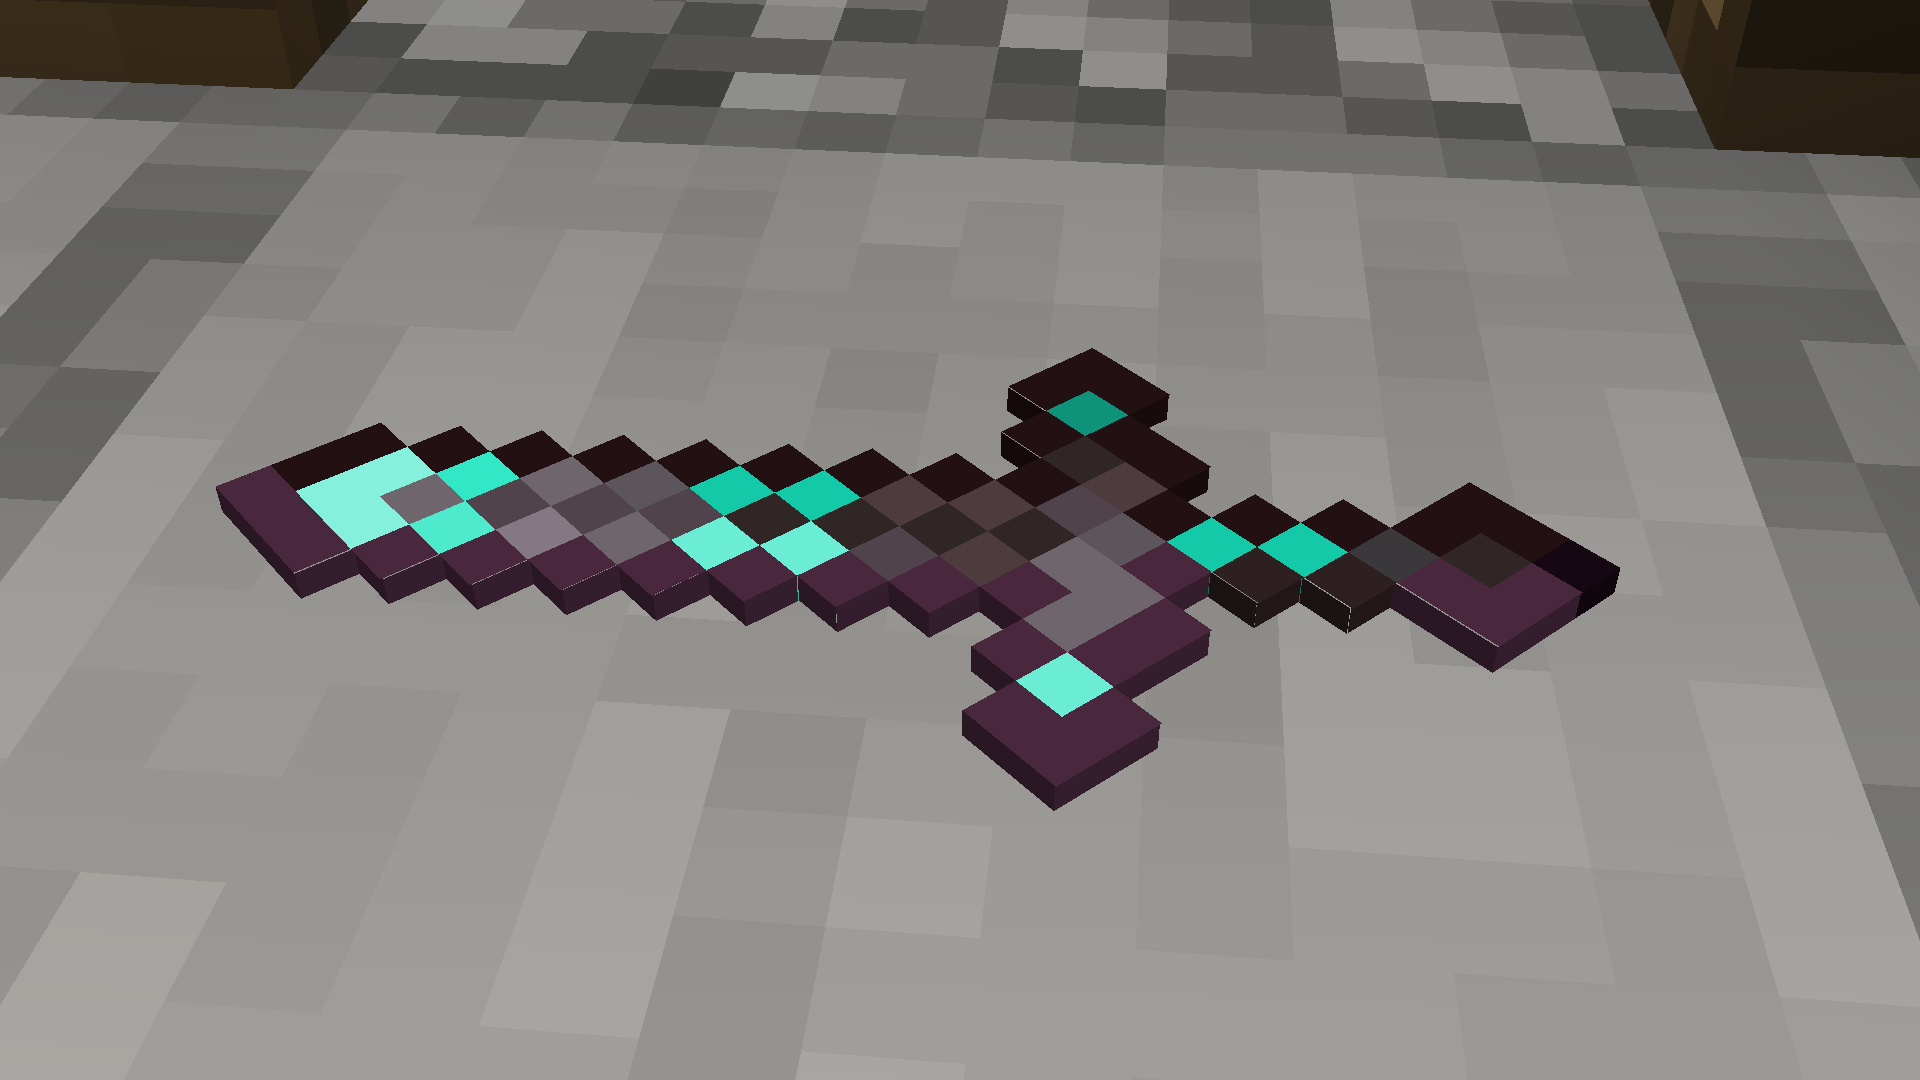 The nethermond sword is a powerful sword made from netherite and diamond ingots